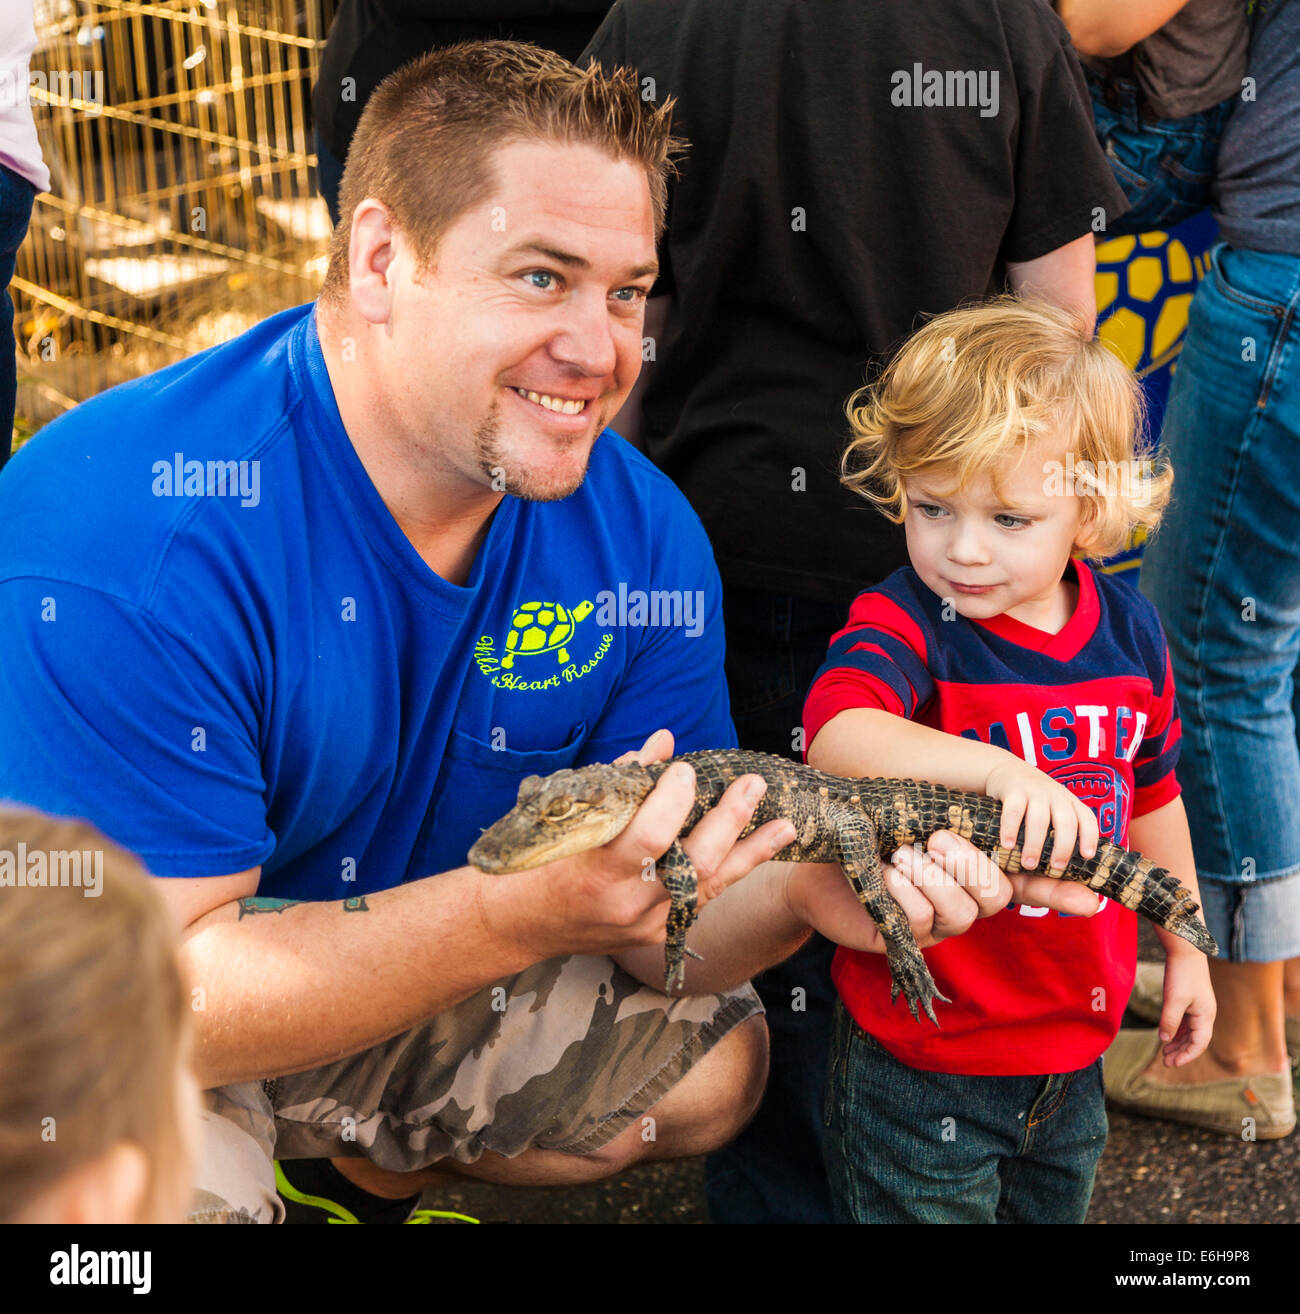 Young boy pets baby alligator being held by man representing Wild At Heart Rescue during a demonstration in Ocean Springs, MS Stock Photo